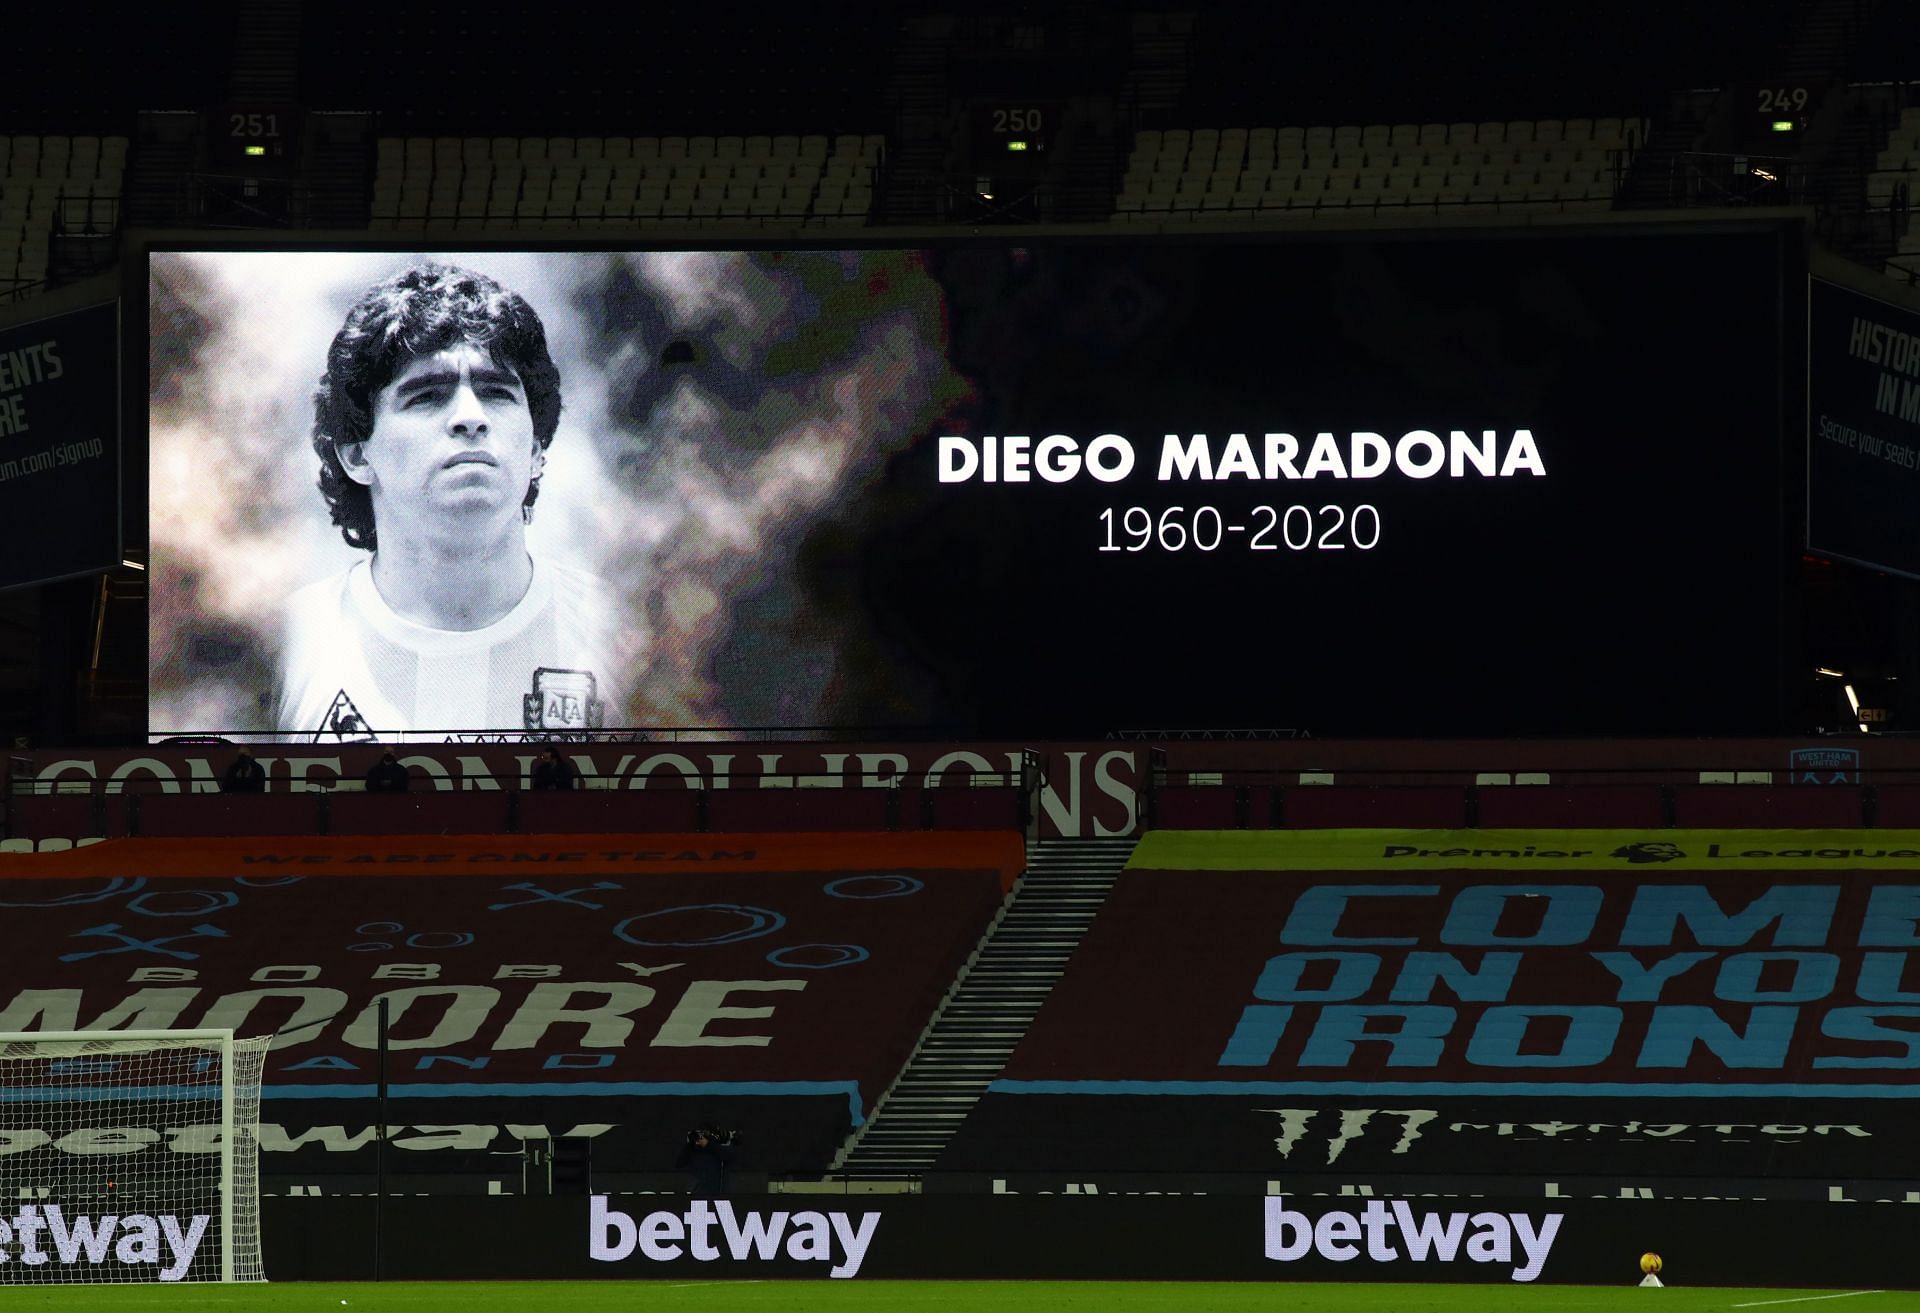 El Diego would have turned 61 today